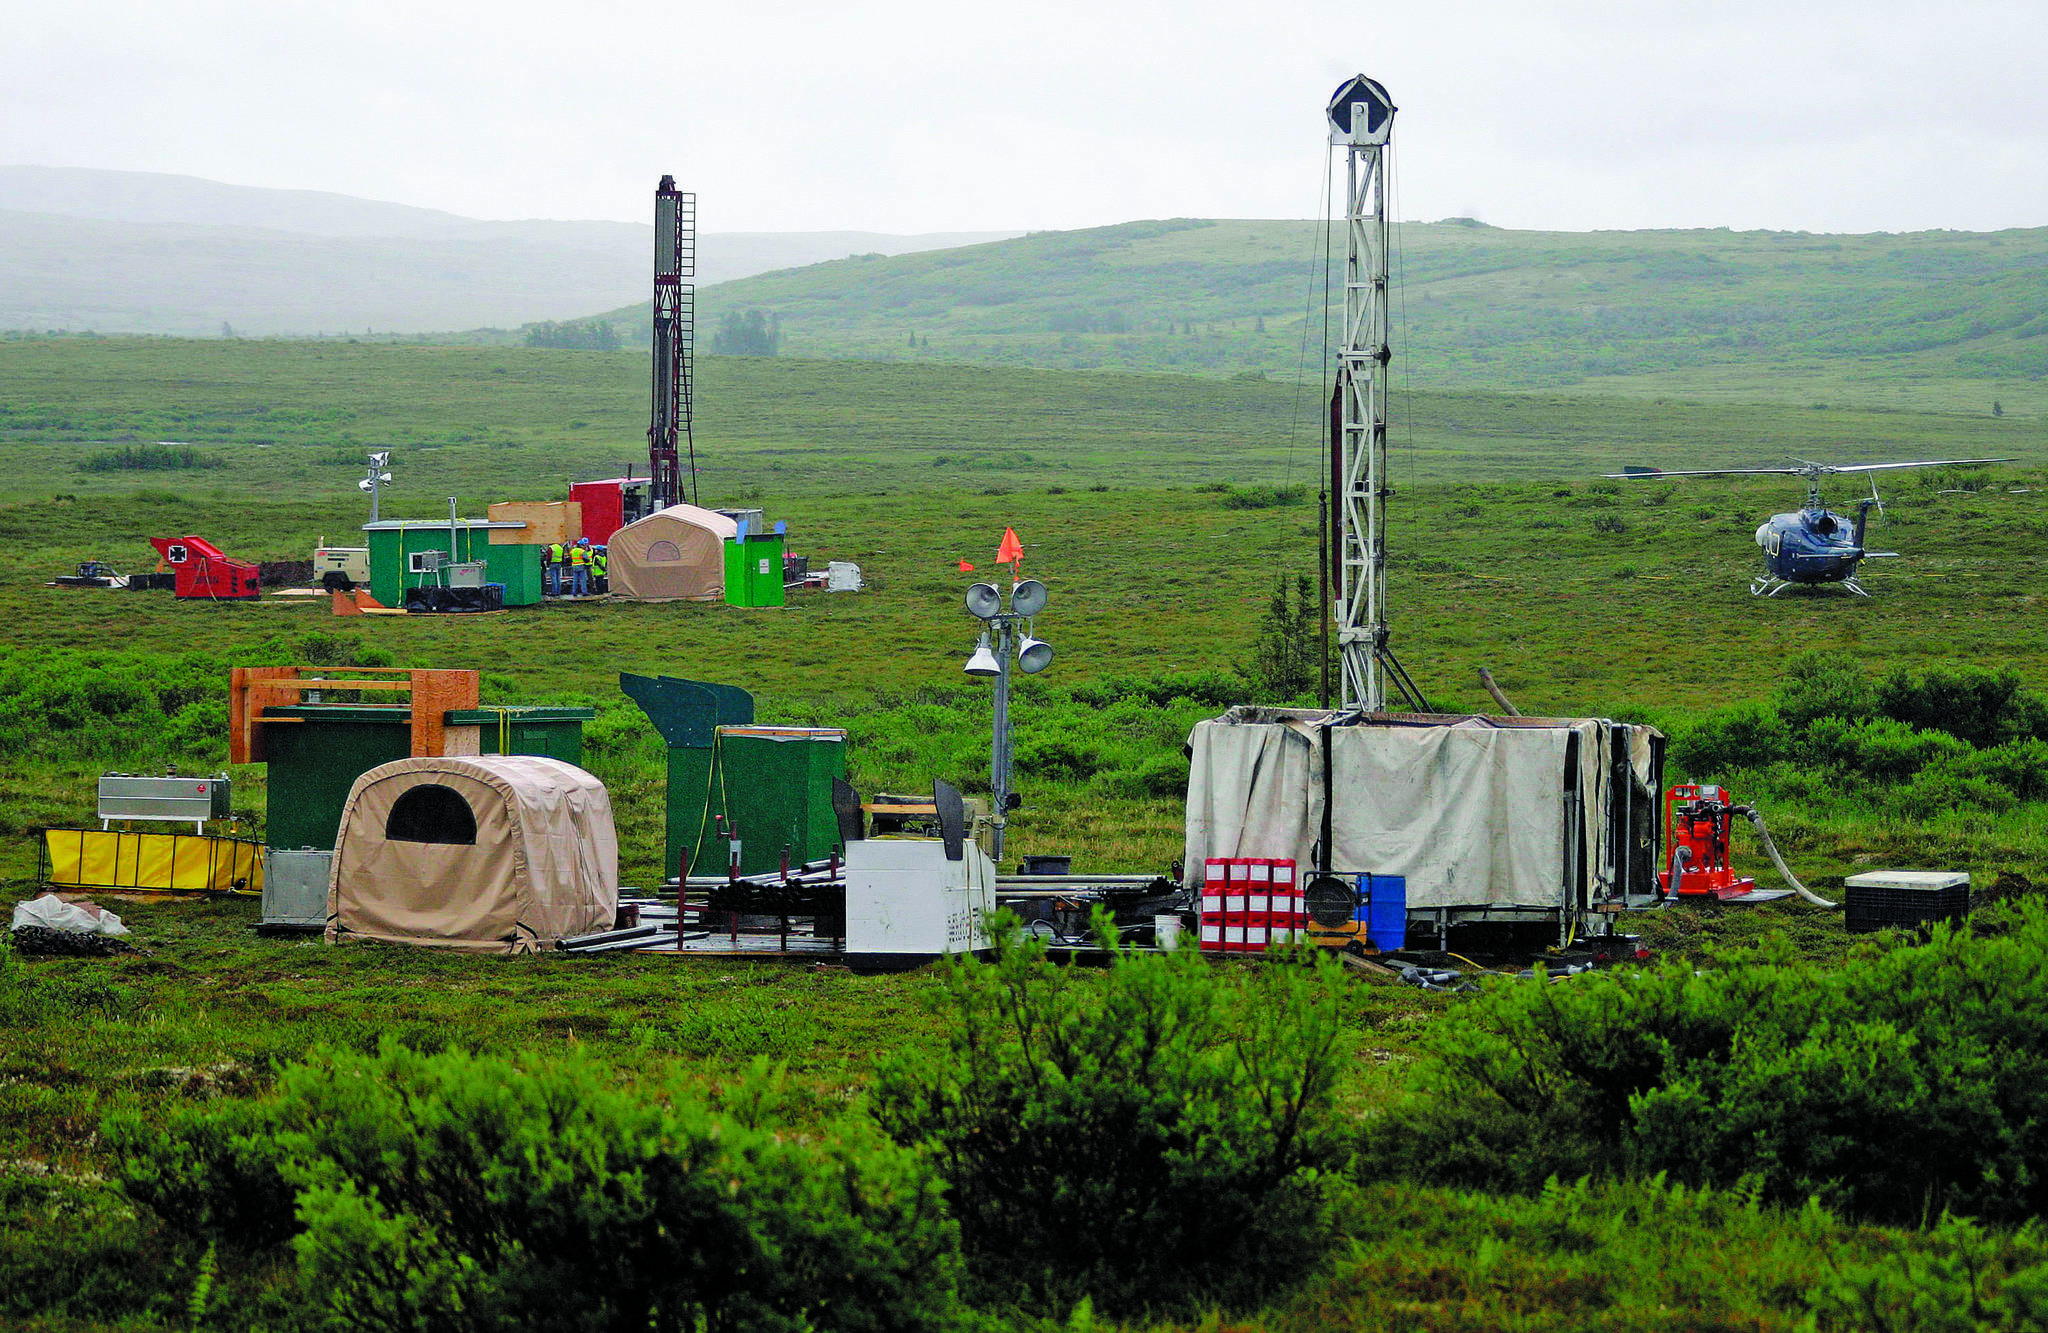 In this July 2007, photo, workers with the Pebble Mine project test drill in the Bristol Bay region of Alaska, near the village of Iliamma. The Pebble Limited Partnership, which wants to build a copper and gold mine near the headwaters of a major U.S. salmon fishery in southwest Alaska, says it plans to offer residents in the region a dividend. (AP Photo | Al Grillo, File)